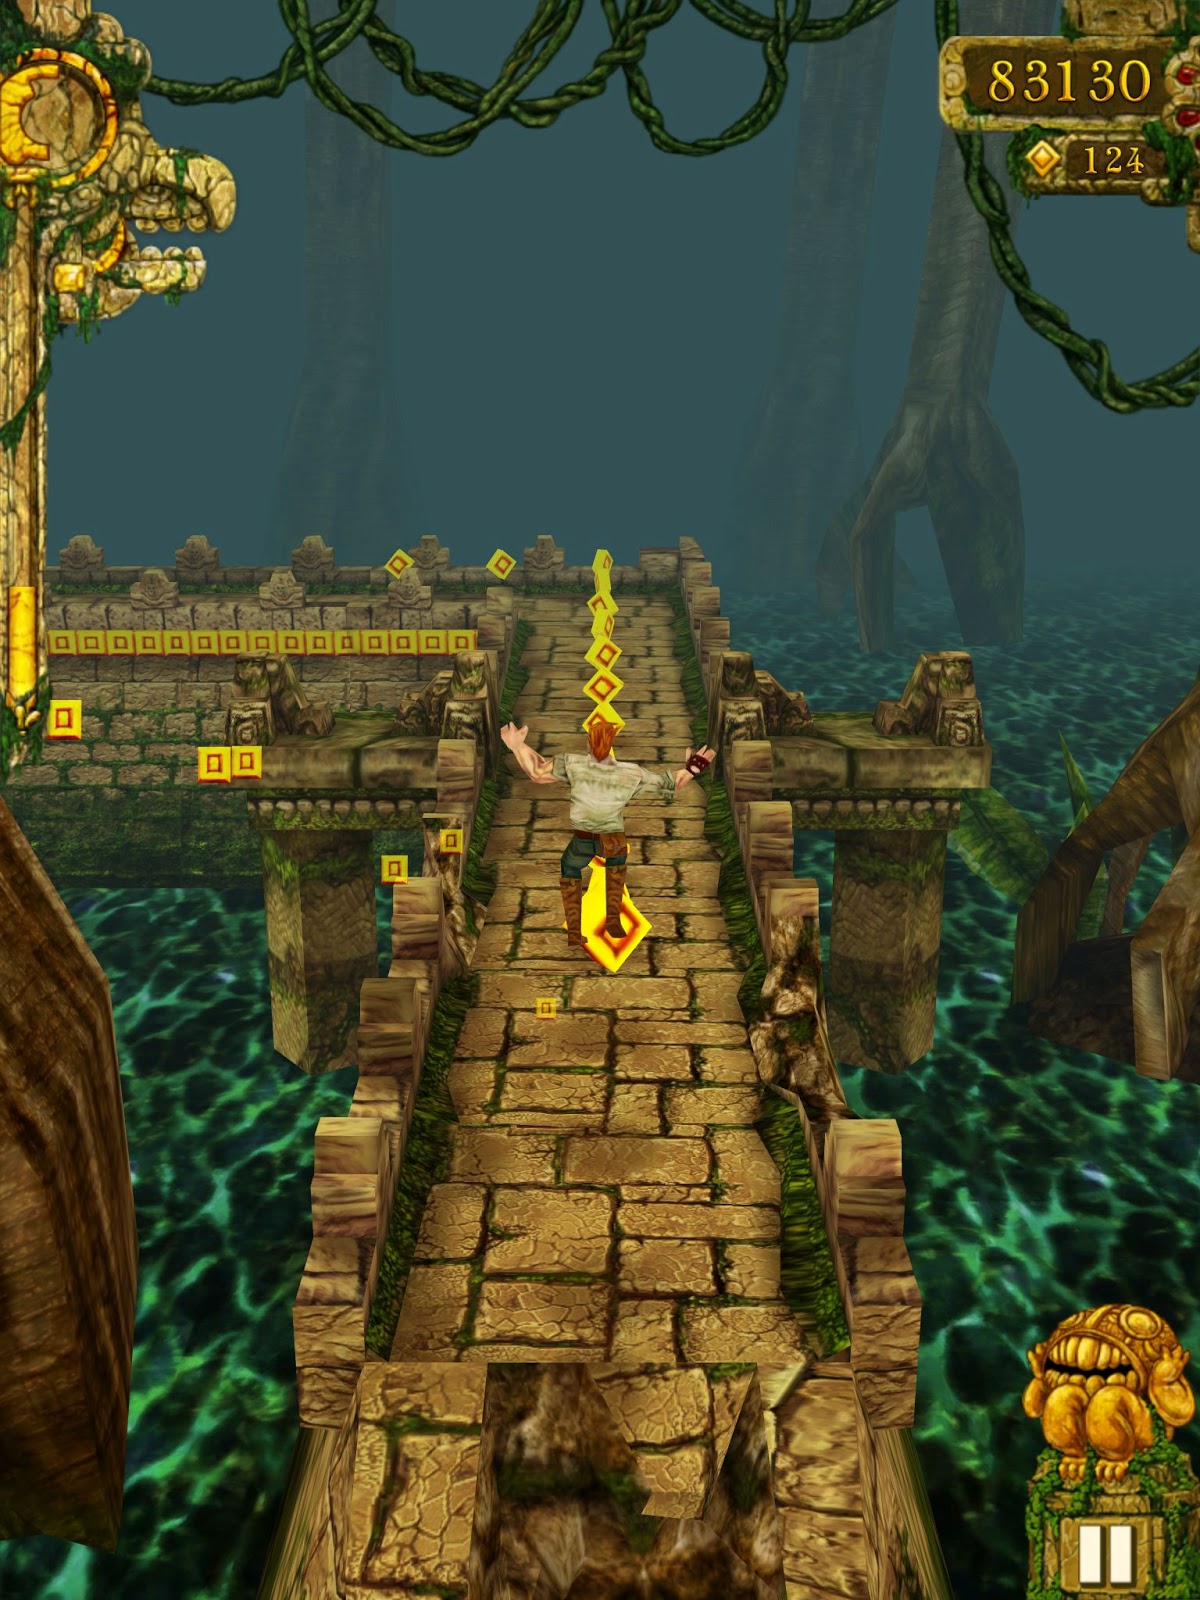 Temple Run for iphone free download full version - Free 